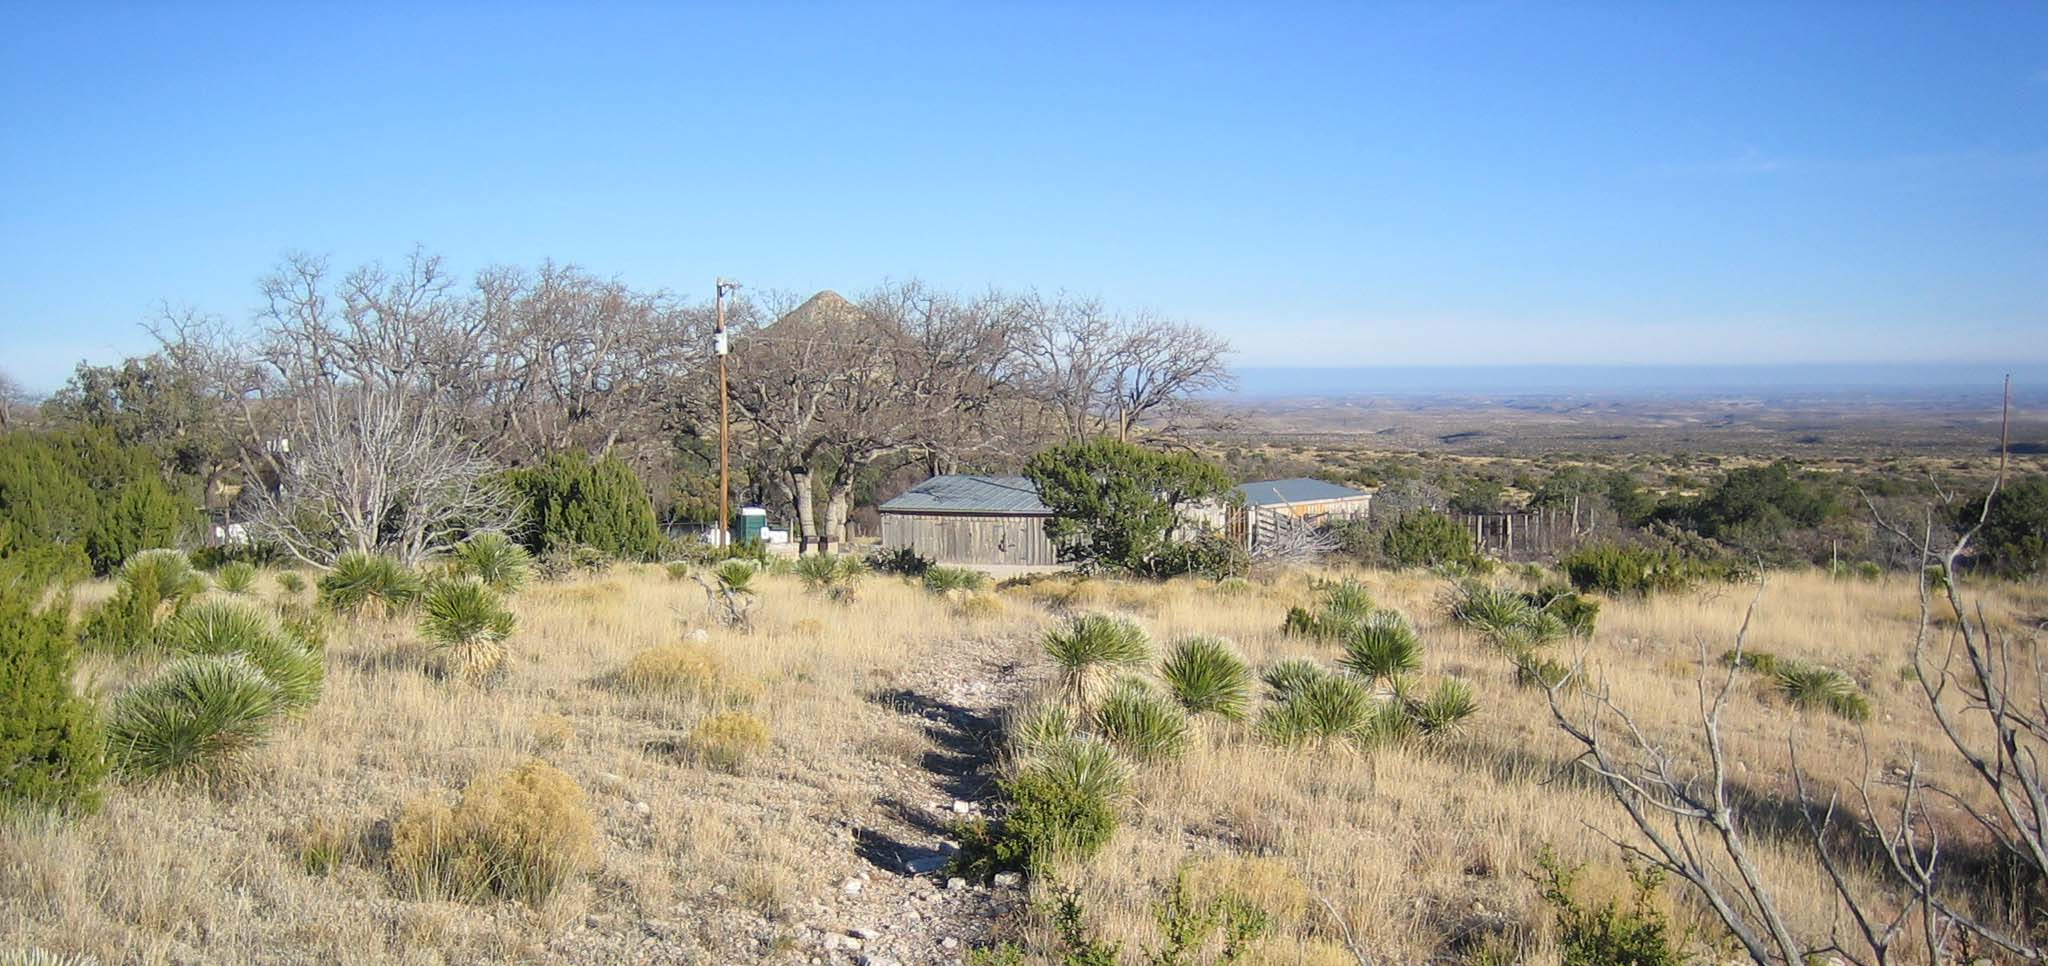 A rocky trail leads to a ranch compound in a desert landscape.